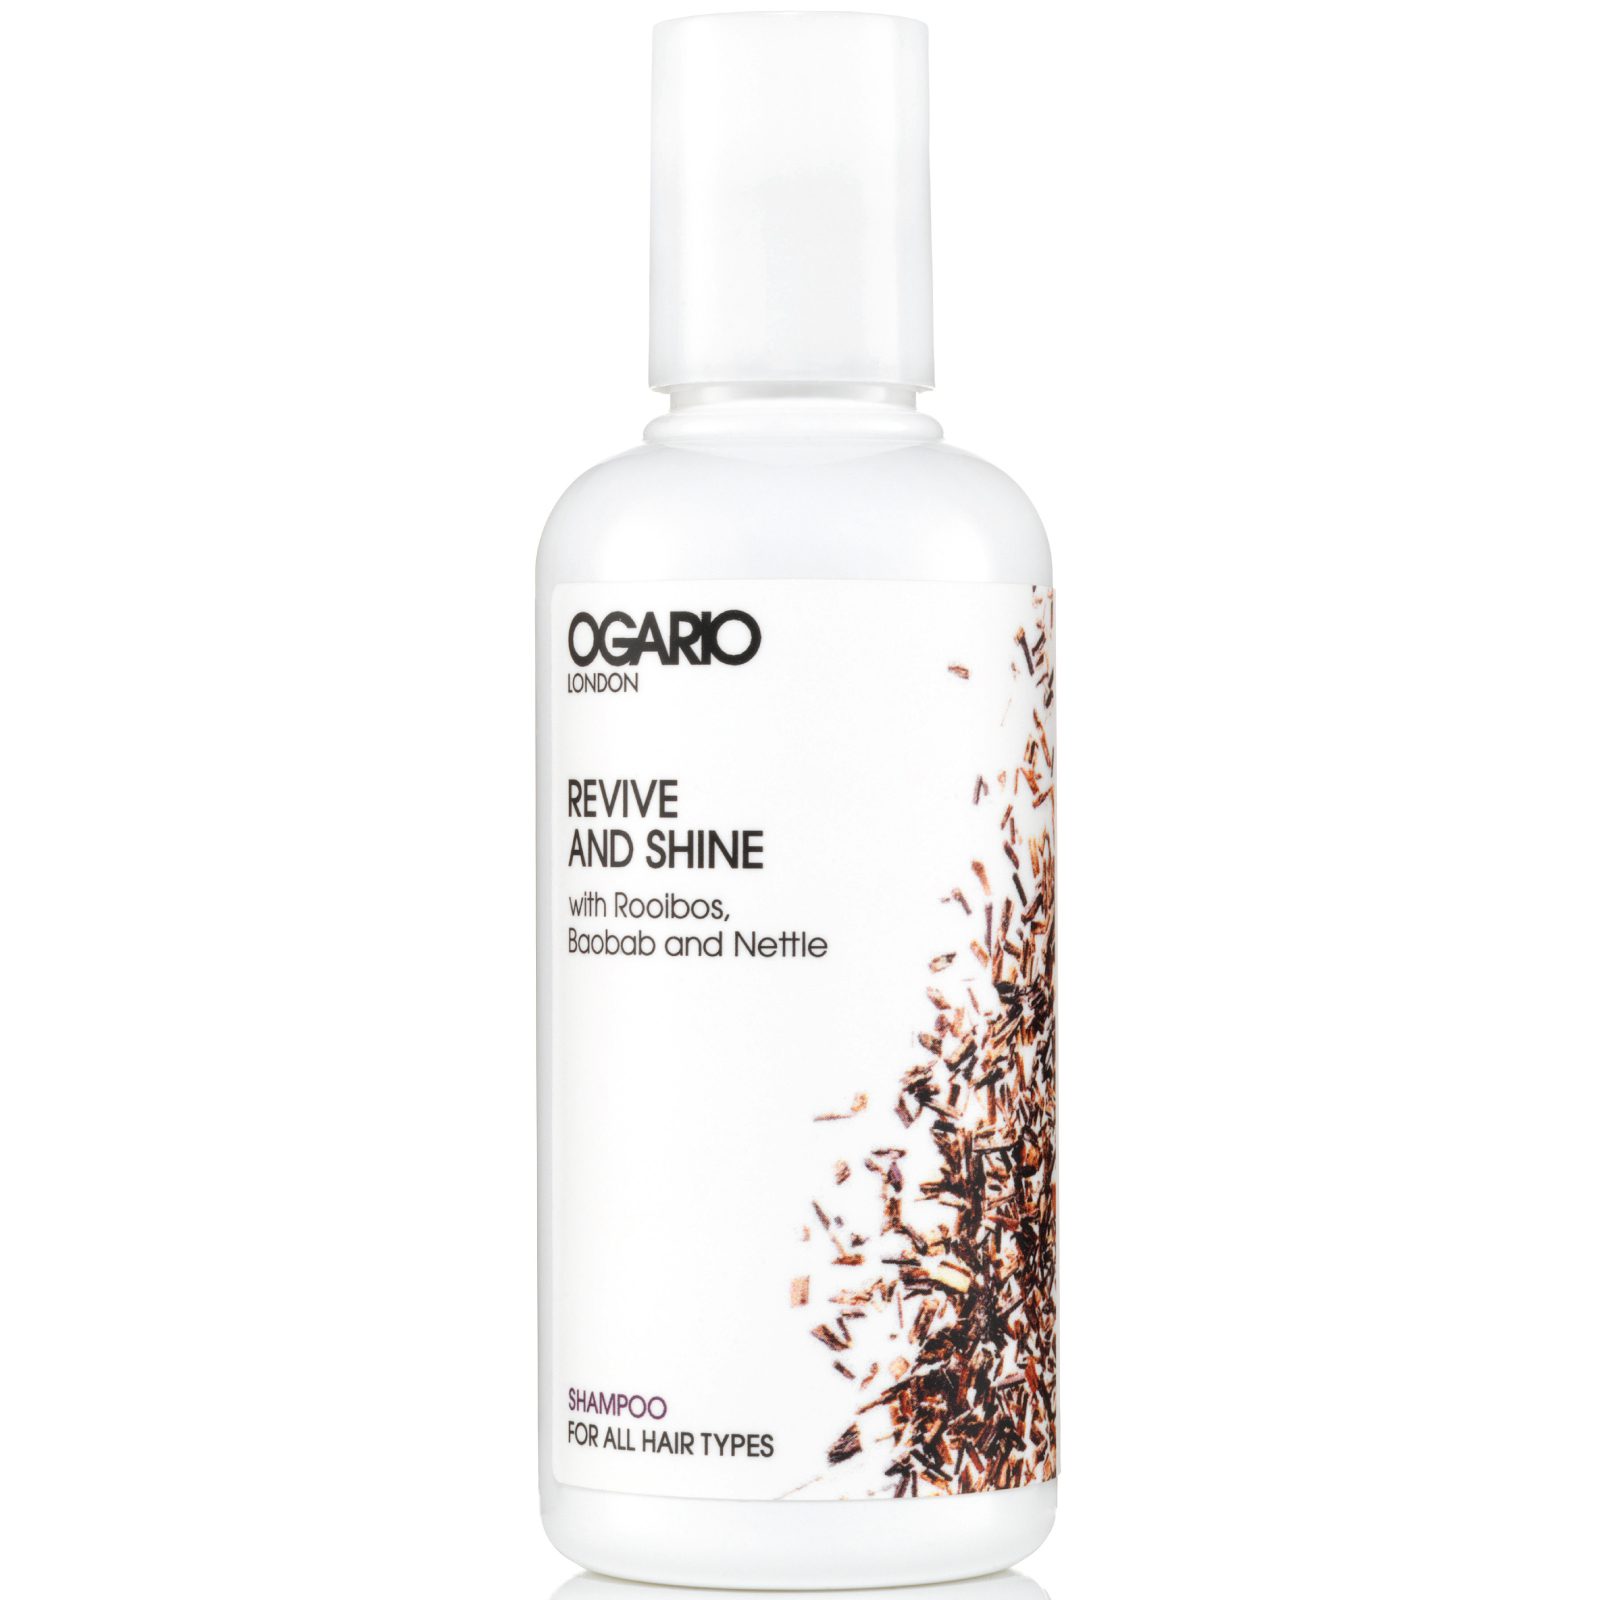 Revive and Shine Travel Natural Shampoo: For All Hair Types, adds volume to fine hair